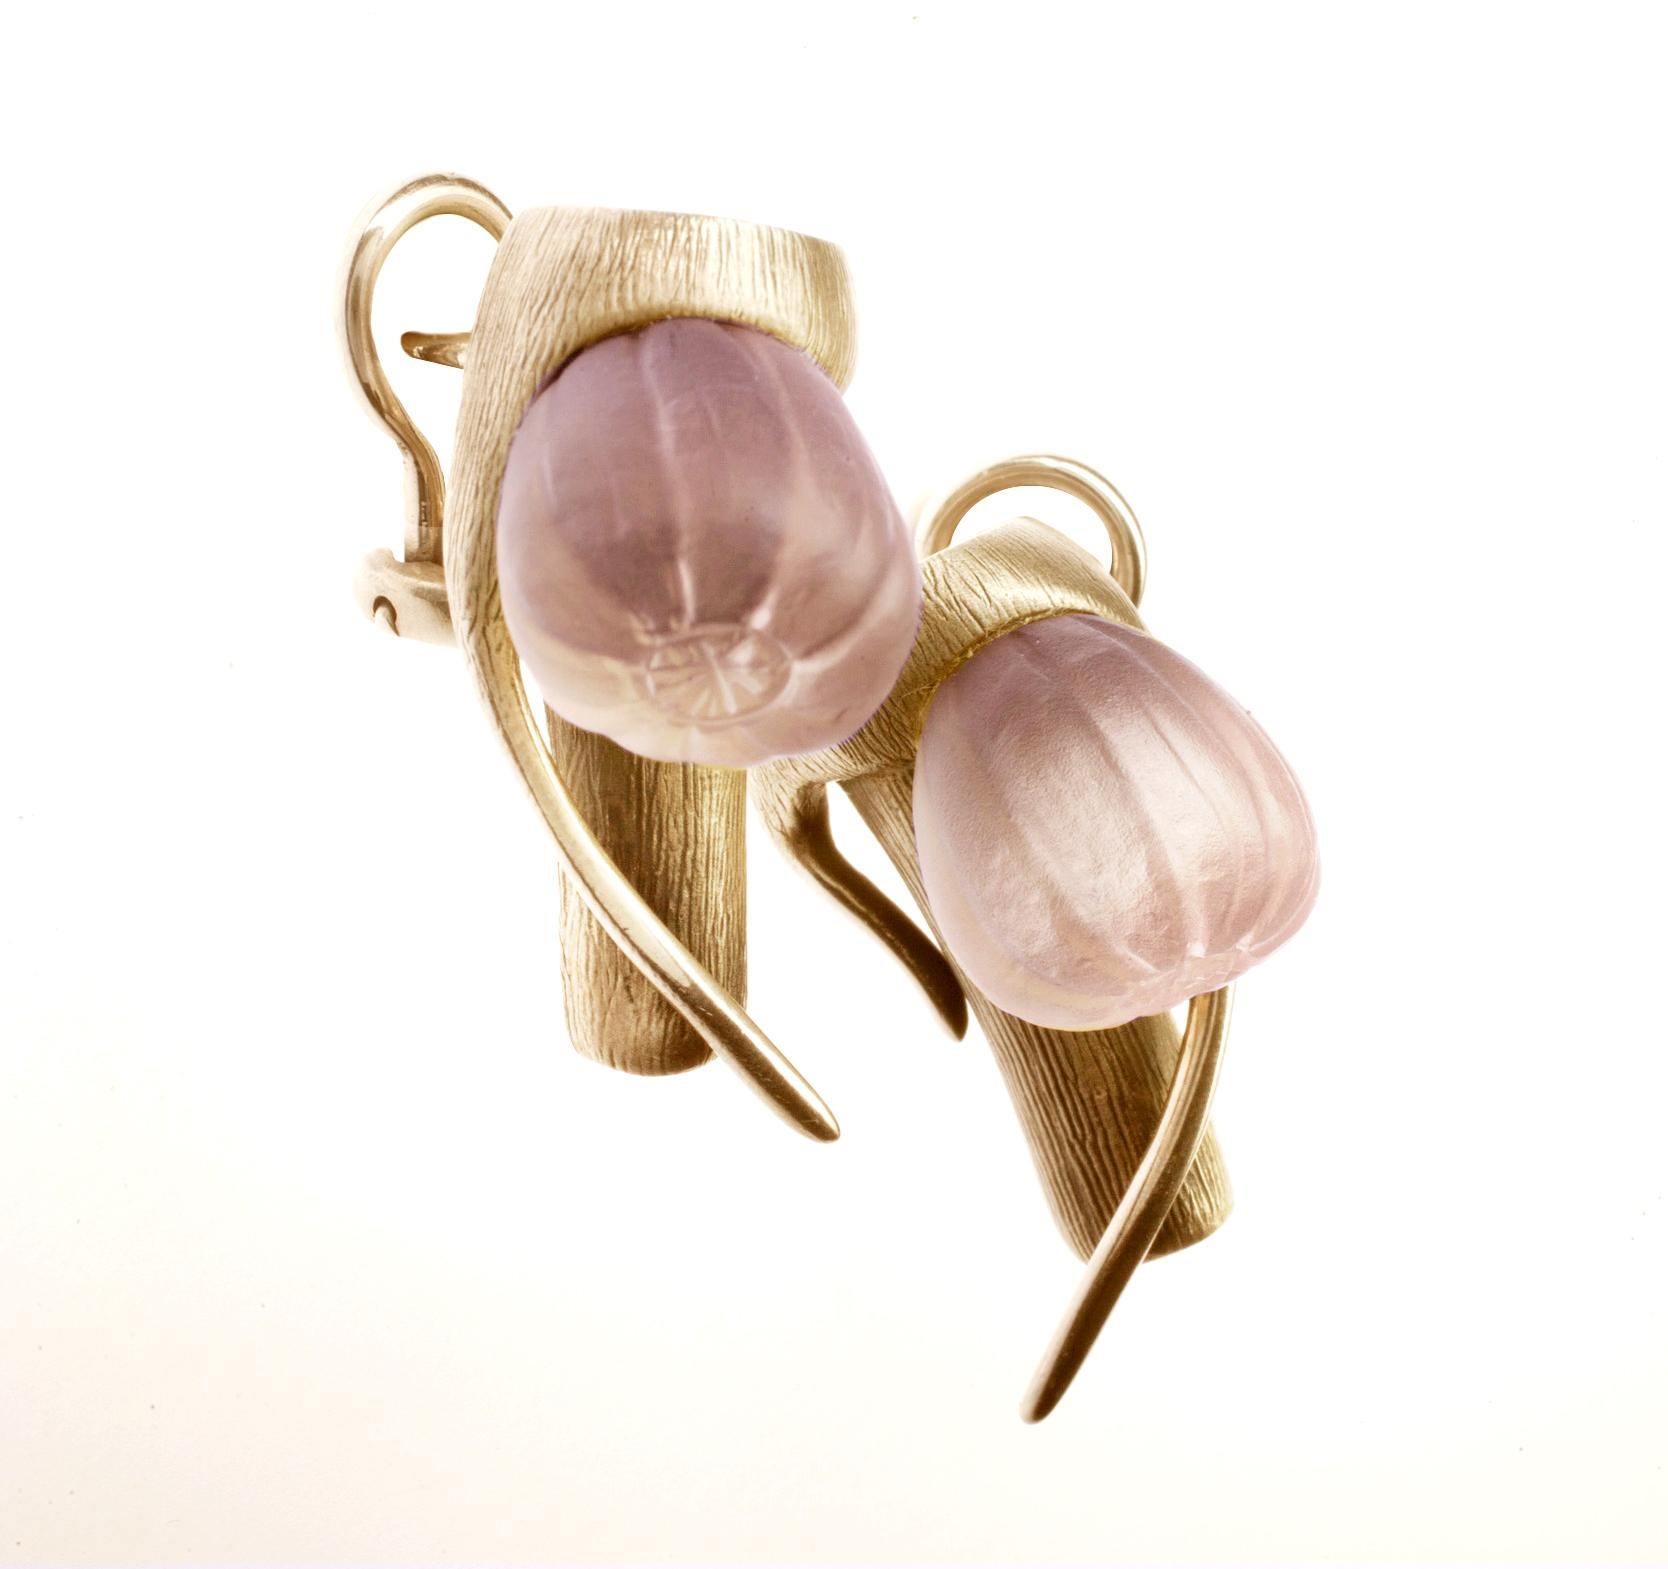 These contemporary Fig cocktail earrings are in 18 karat rose gold with tender frosted pink onyx. The collection was featured in Harper's Bazaar UA editorial, published issue. The earrings were chosen for the 64th Berlinale Film Festival red carpet